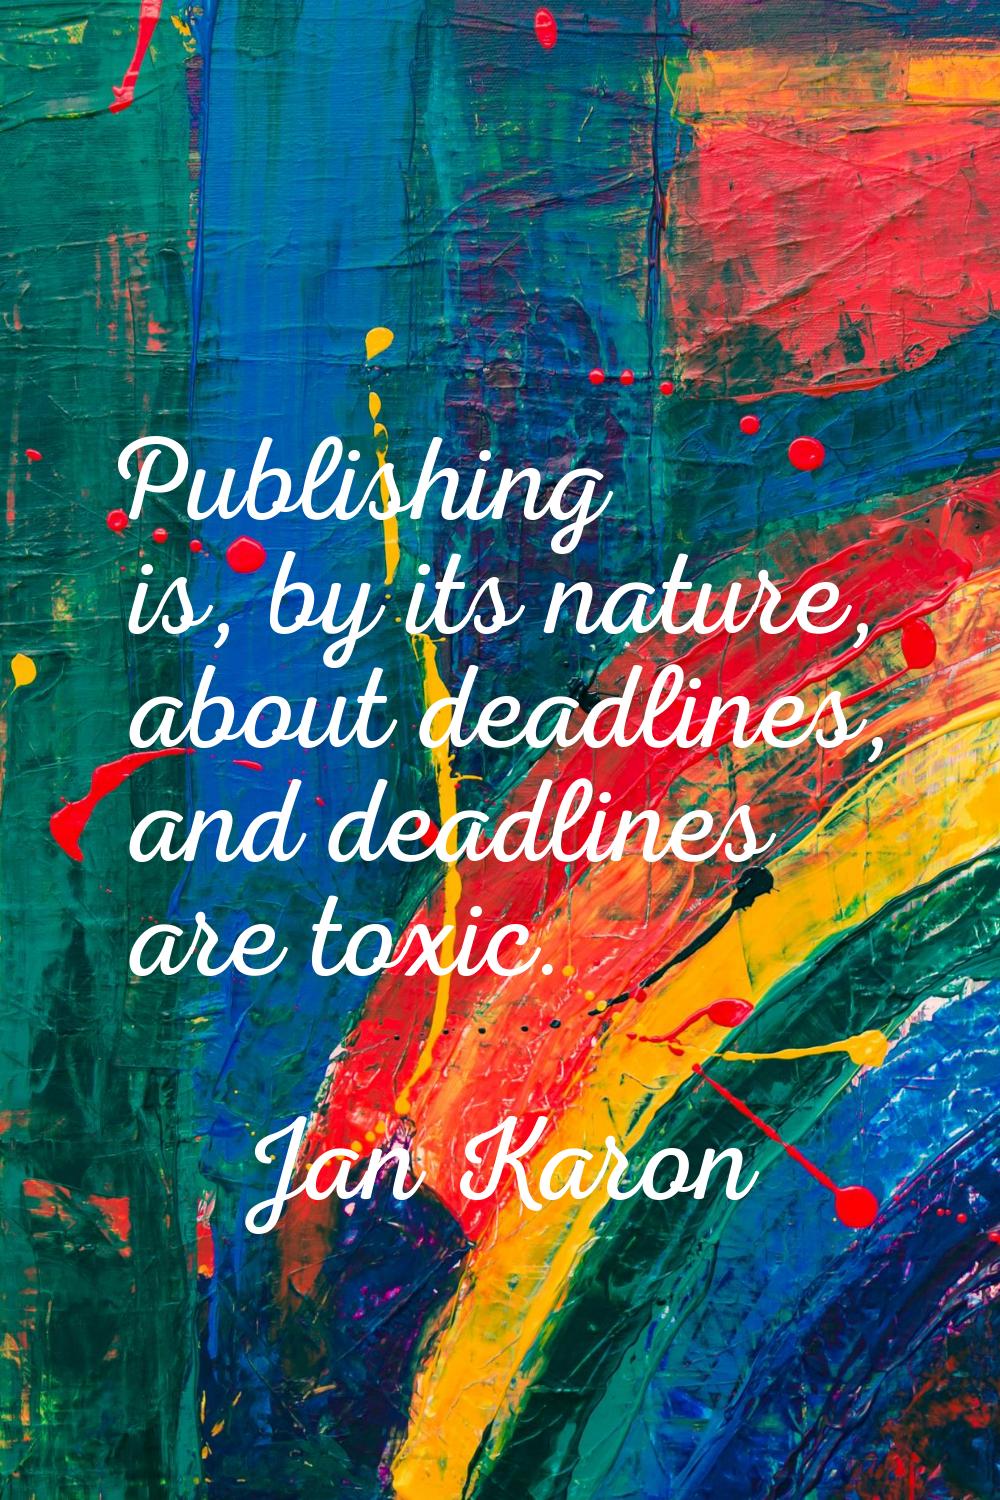 Publishing is, by its nature, about deadlines, and deadlines are toxic.